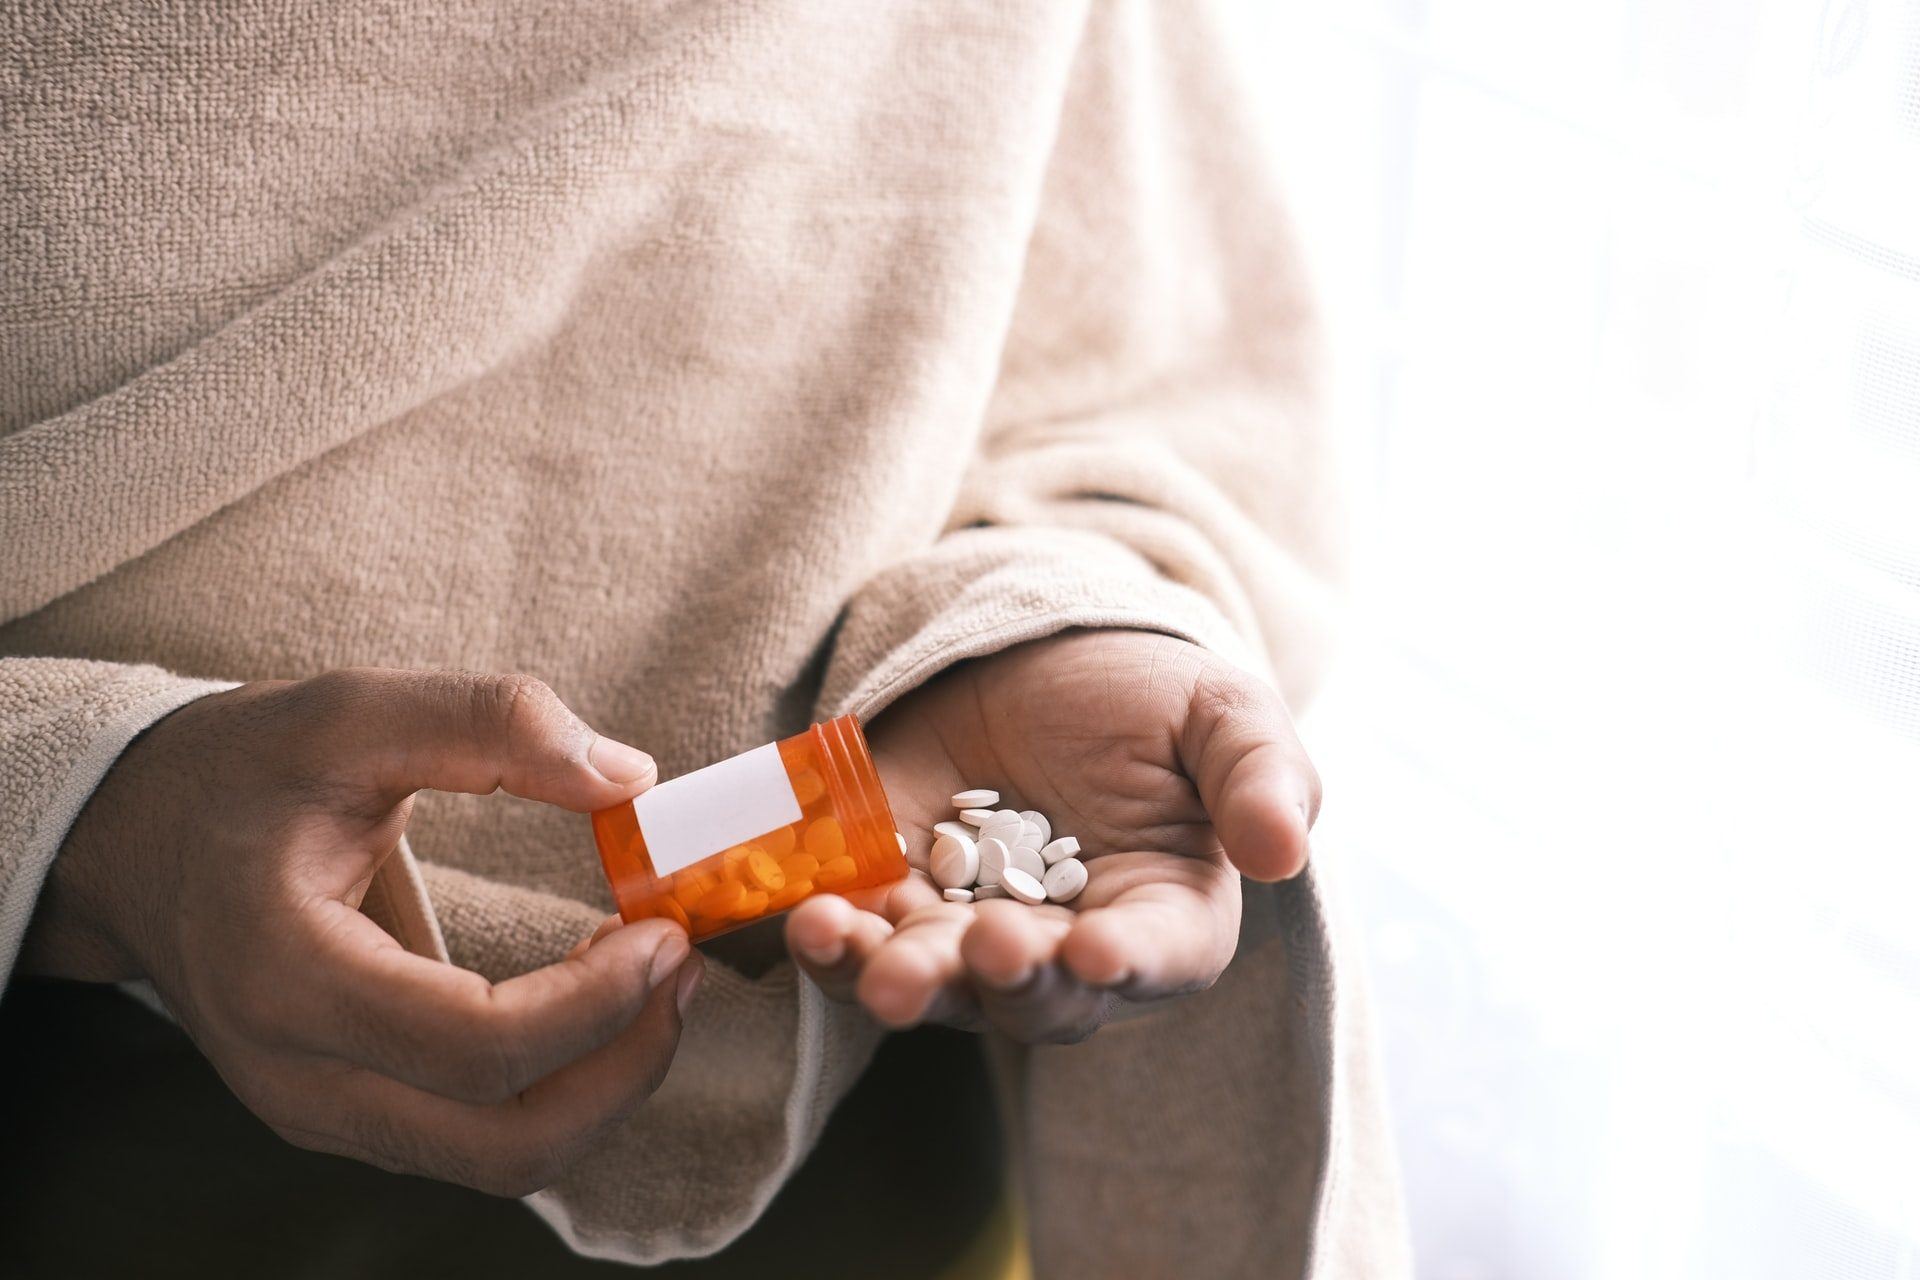 Five Factors That Increase Risk for Substance Use